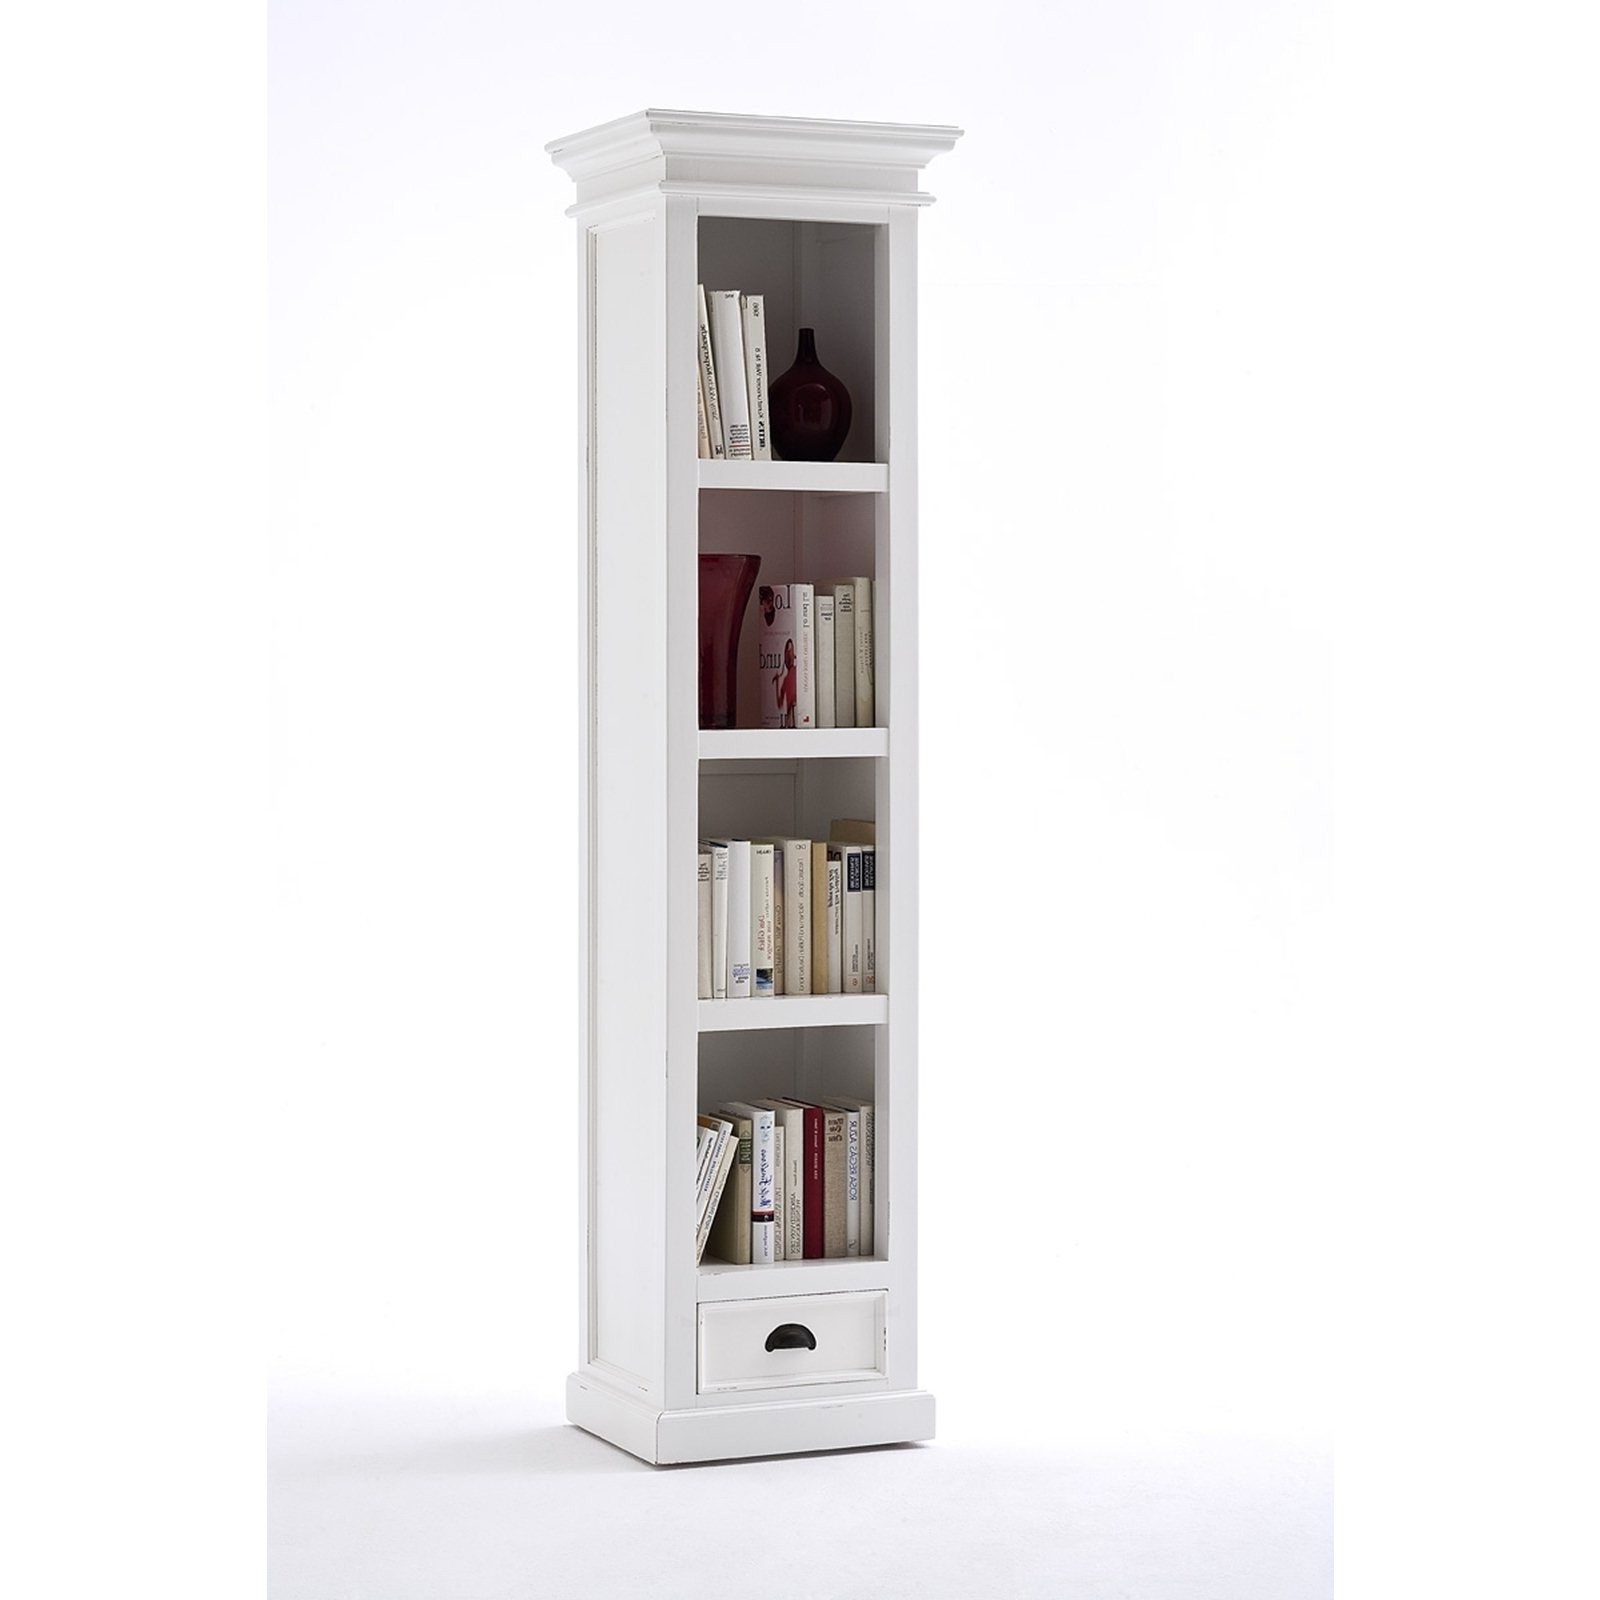 2017 White Bookcases With Glass Doors Throughout Bookcases Modern Traditional Ikea Distressed White Bookcase With (View 14 of 15)